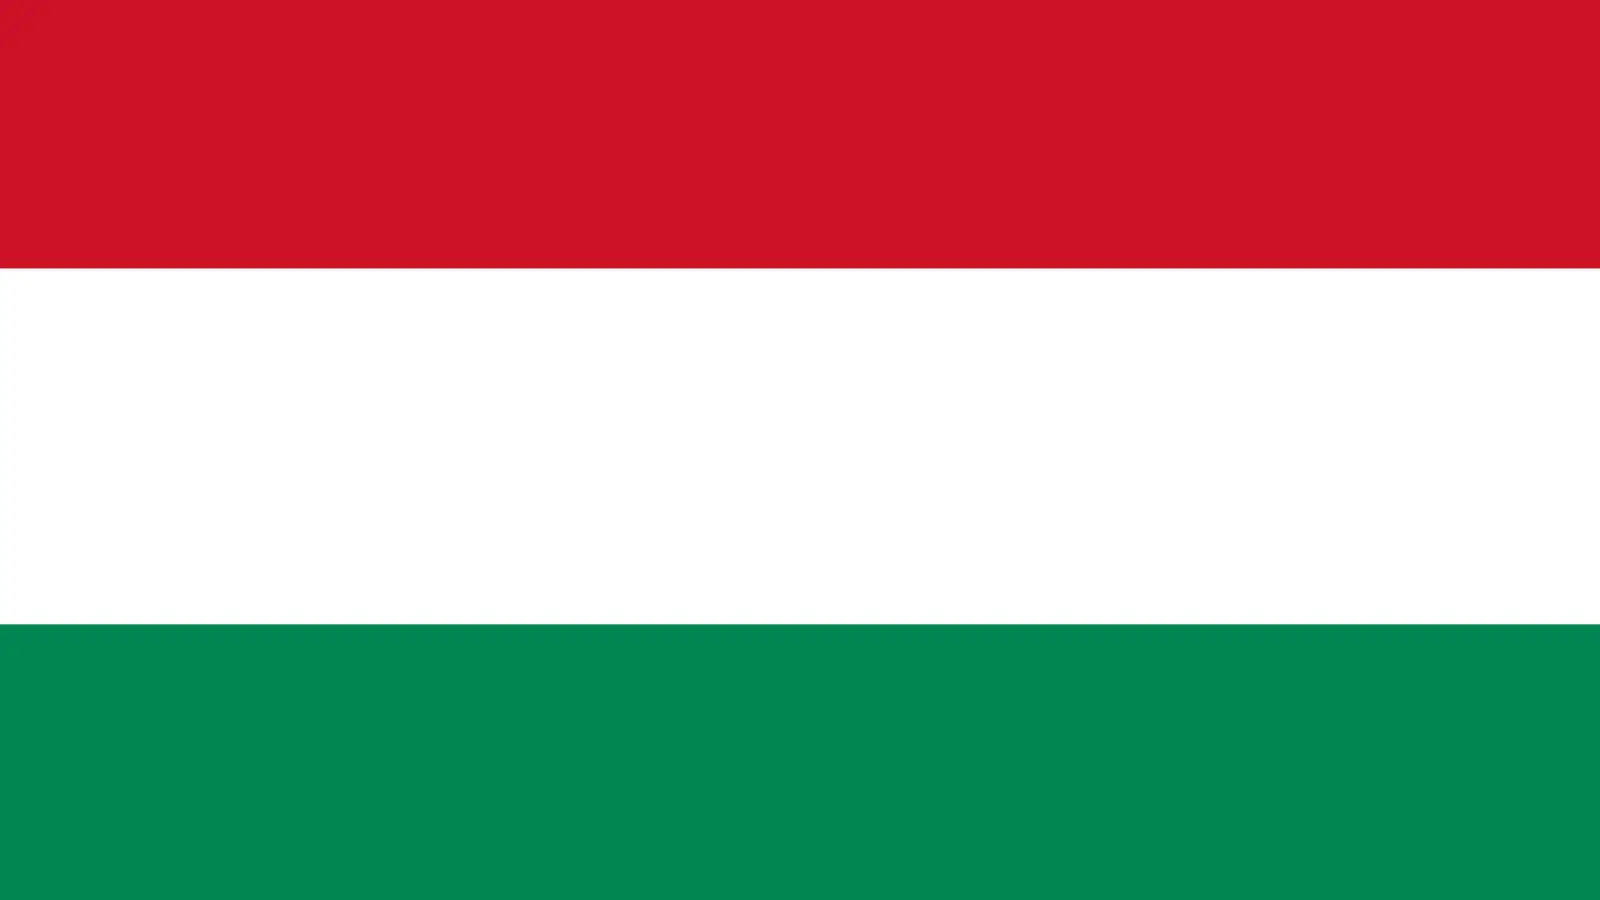 Hungary Opposes an Important Decision Requested within the EU